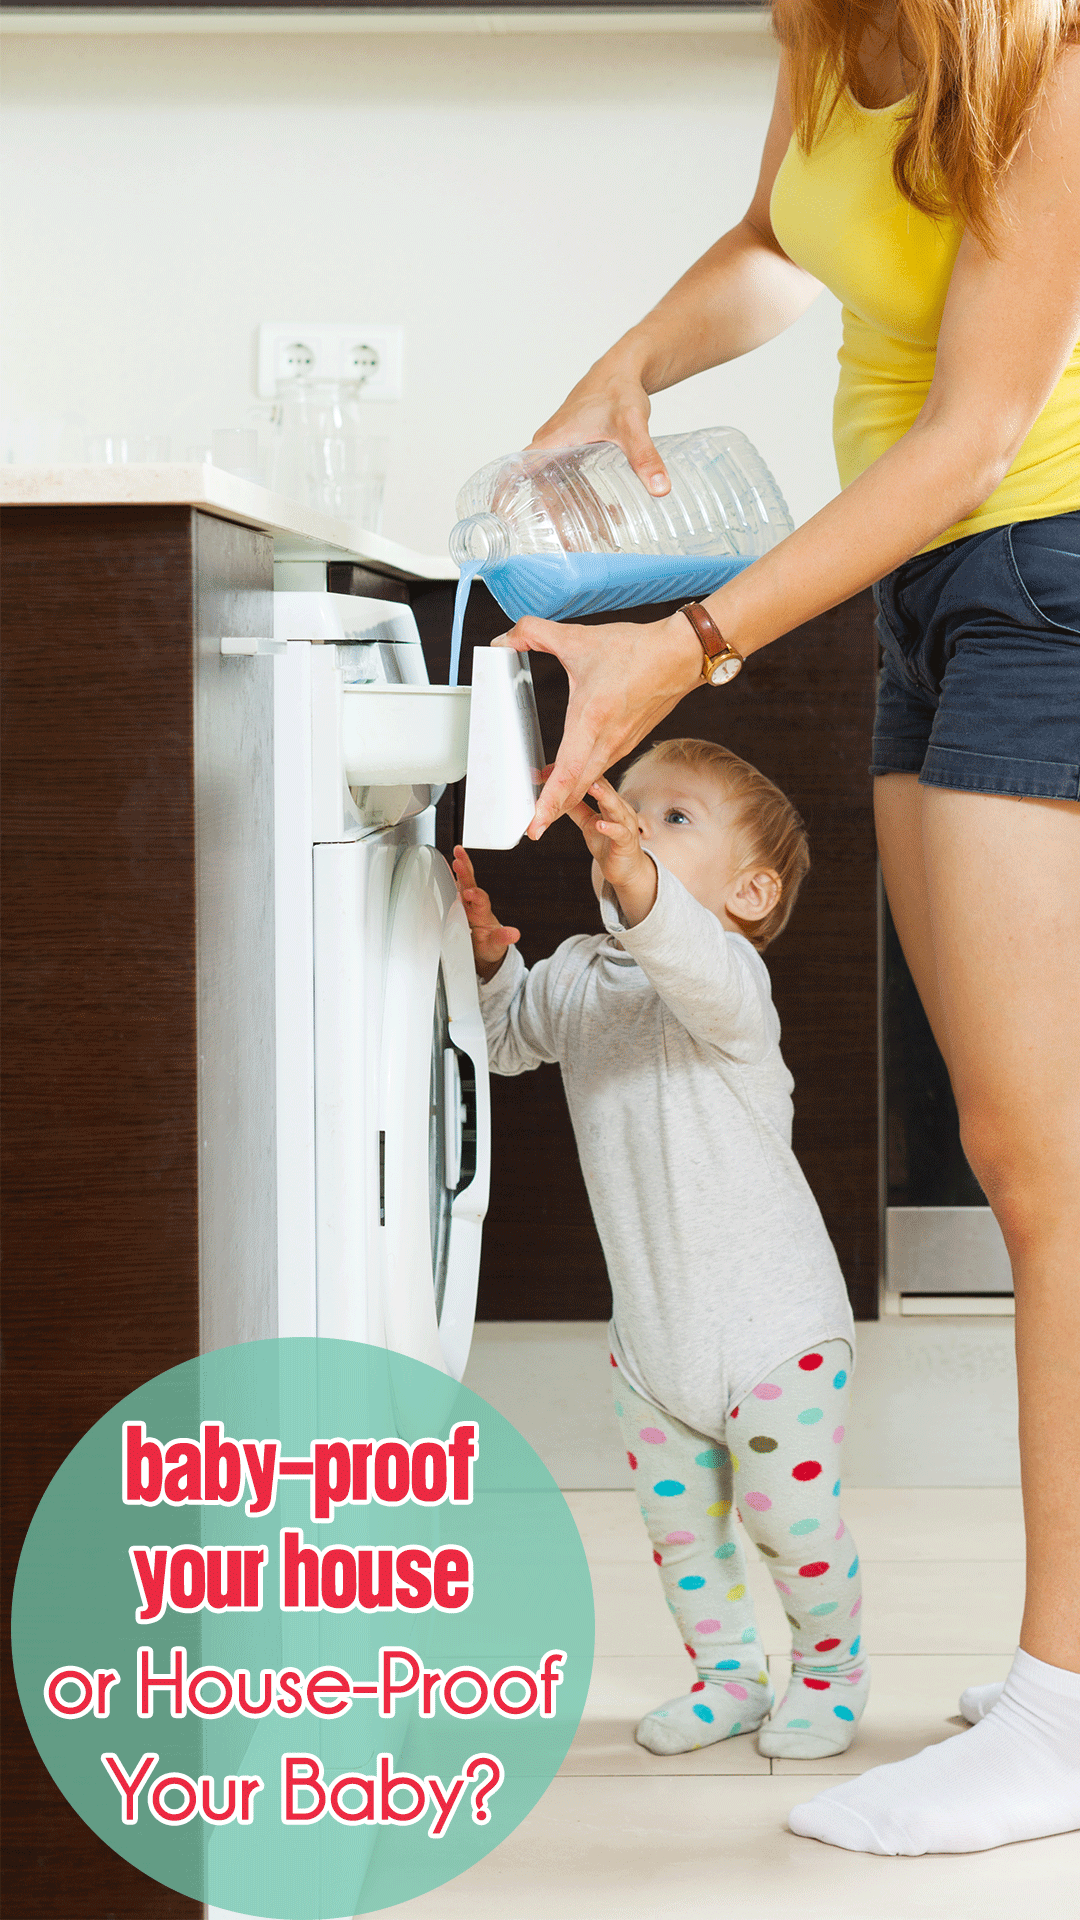 Baby-Proof Your House or House-Proof Your Baby?